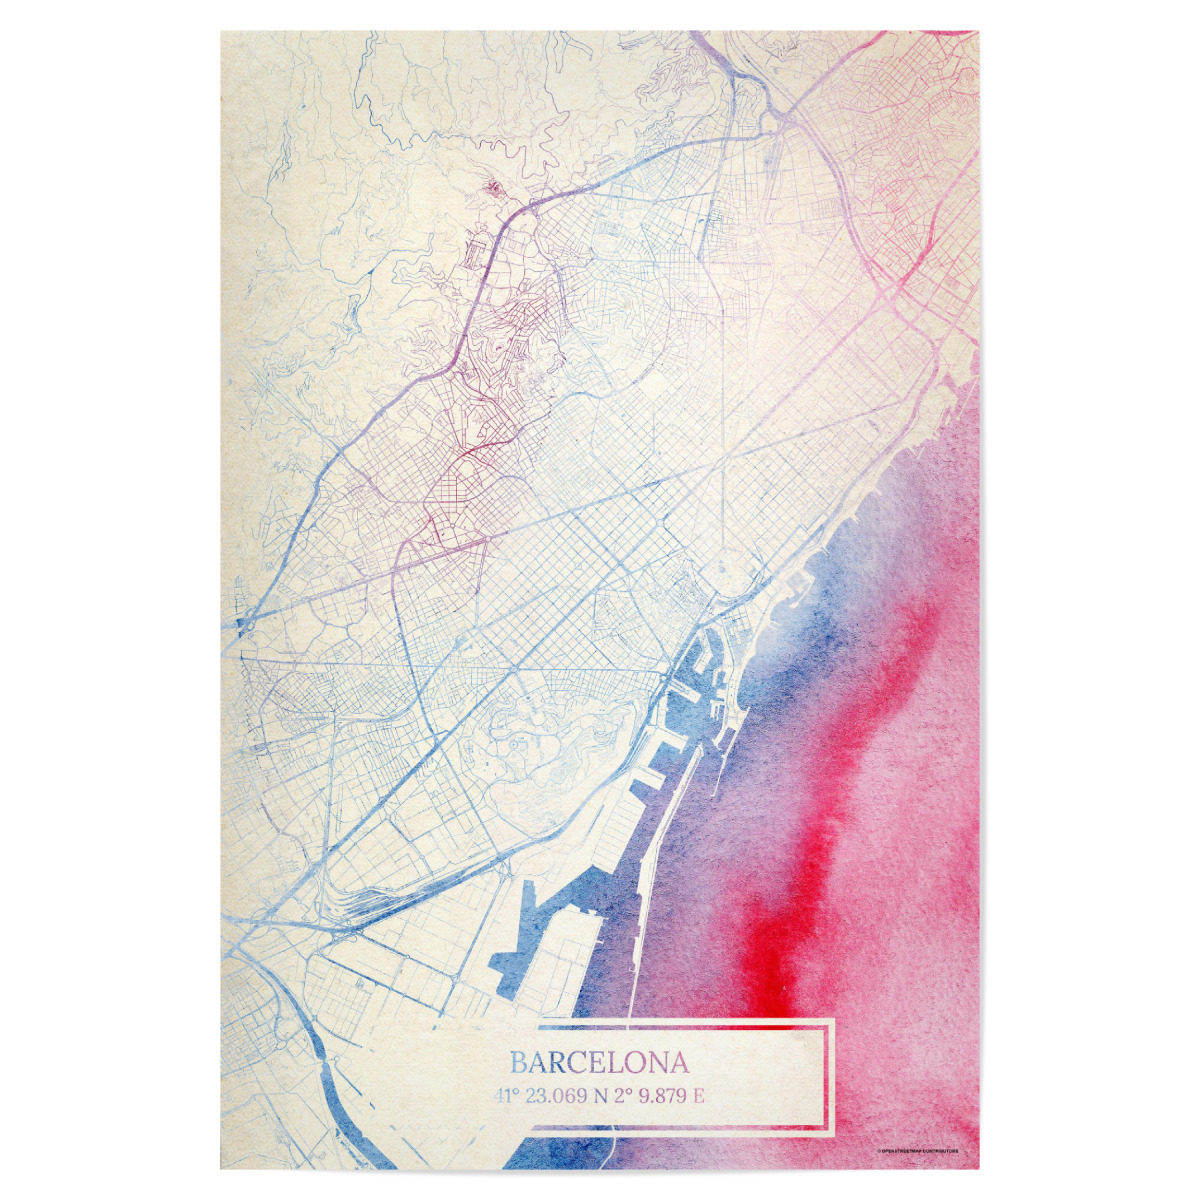 Barcelona Spanien Map Rose And Serenity I Als Poster Bei Artboxone Kaufen